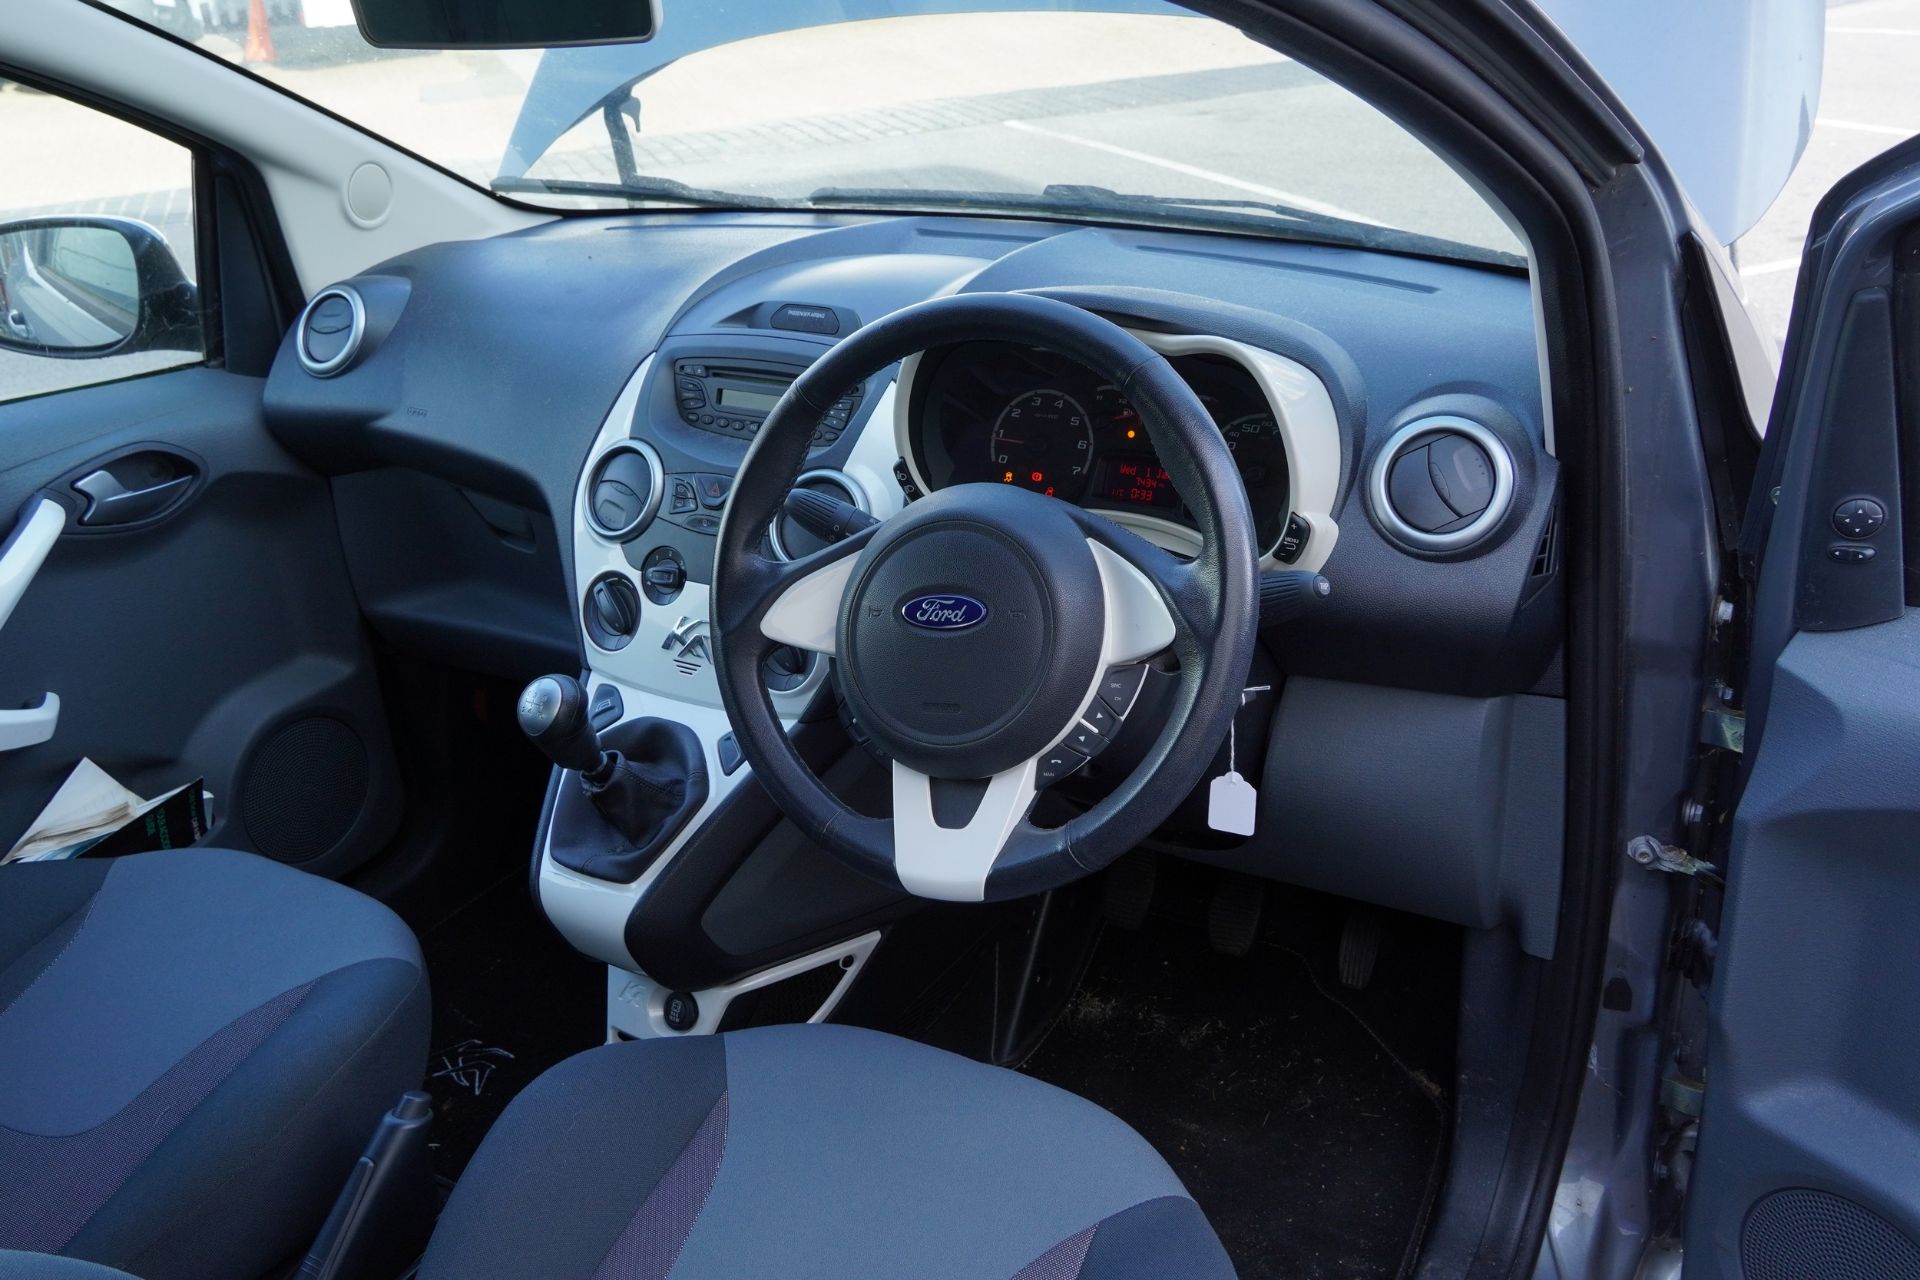 2015 manual Ford KA Zetec. 1.2 petrol three door hatchback, Reg GX15 YGV, One owner from new, 7434 - Image 13 of 15